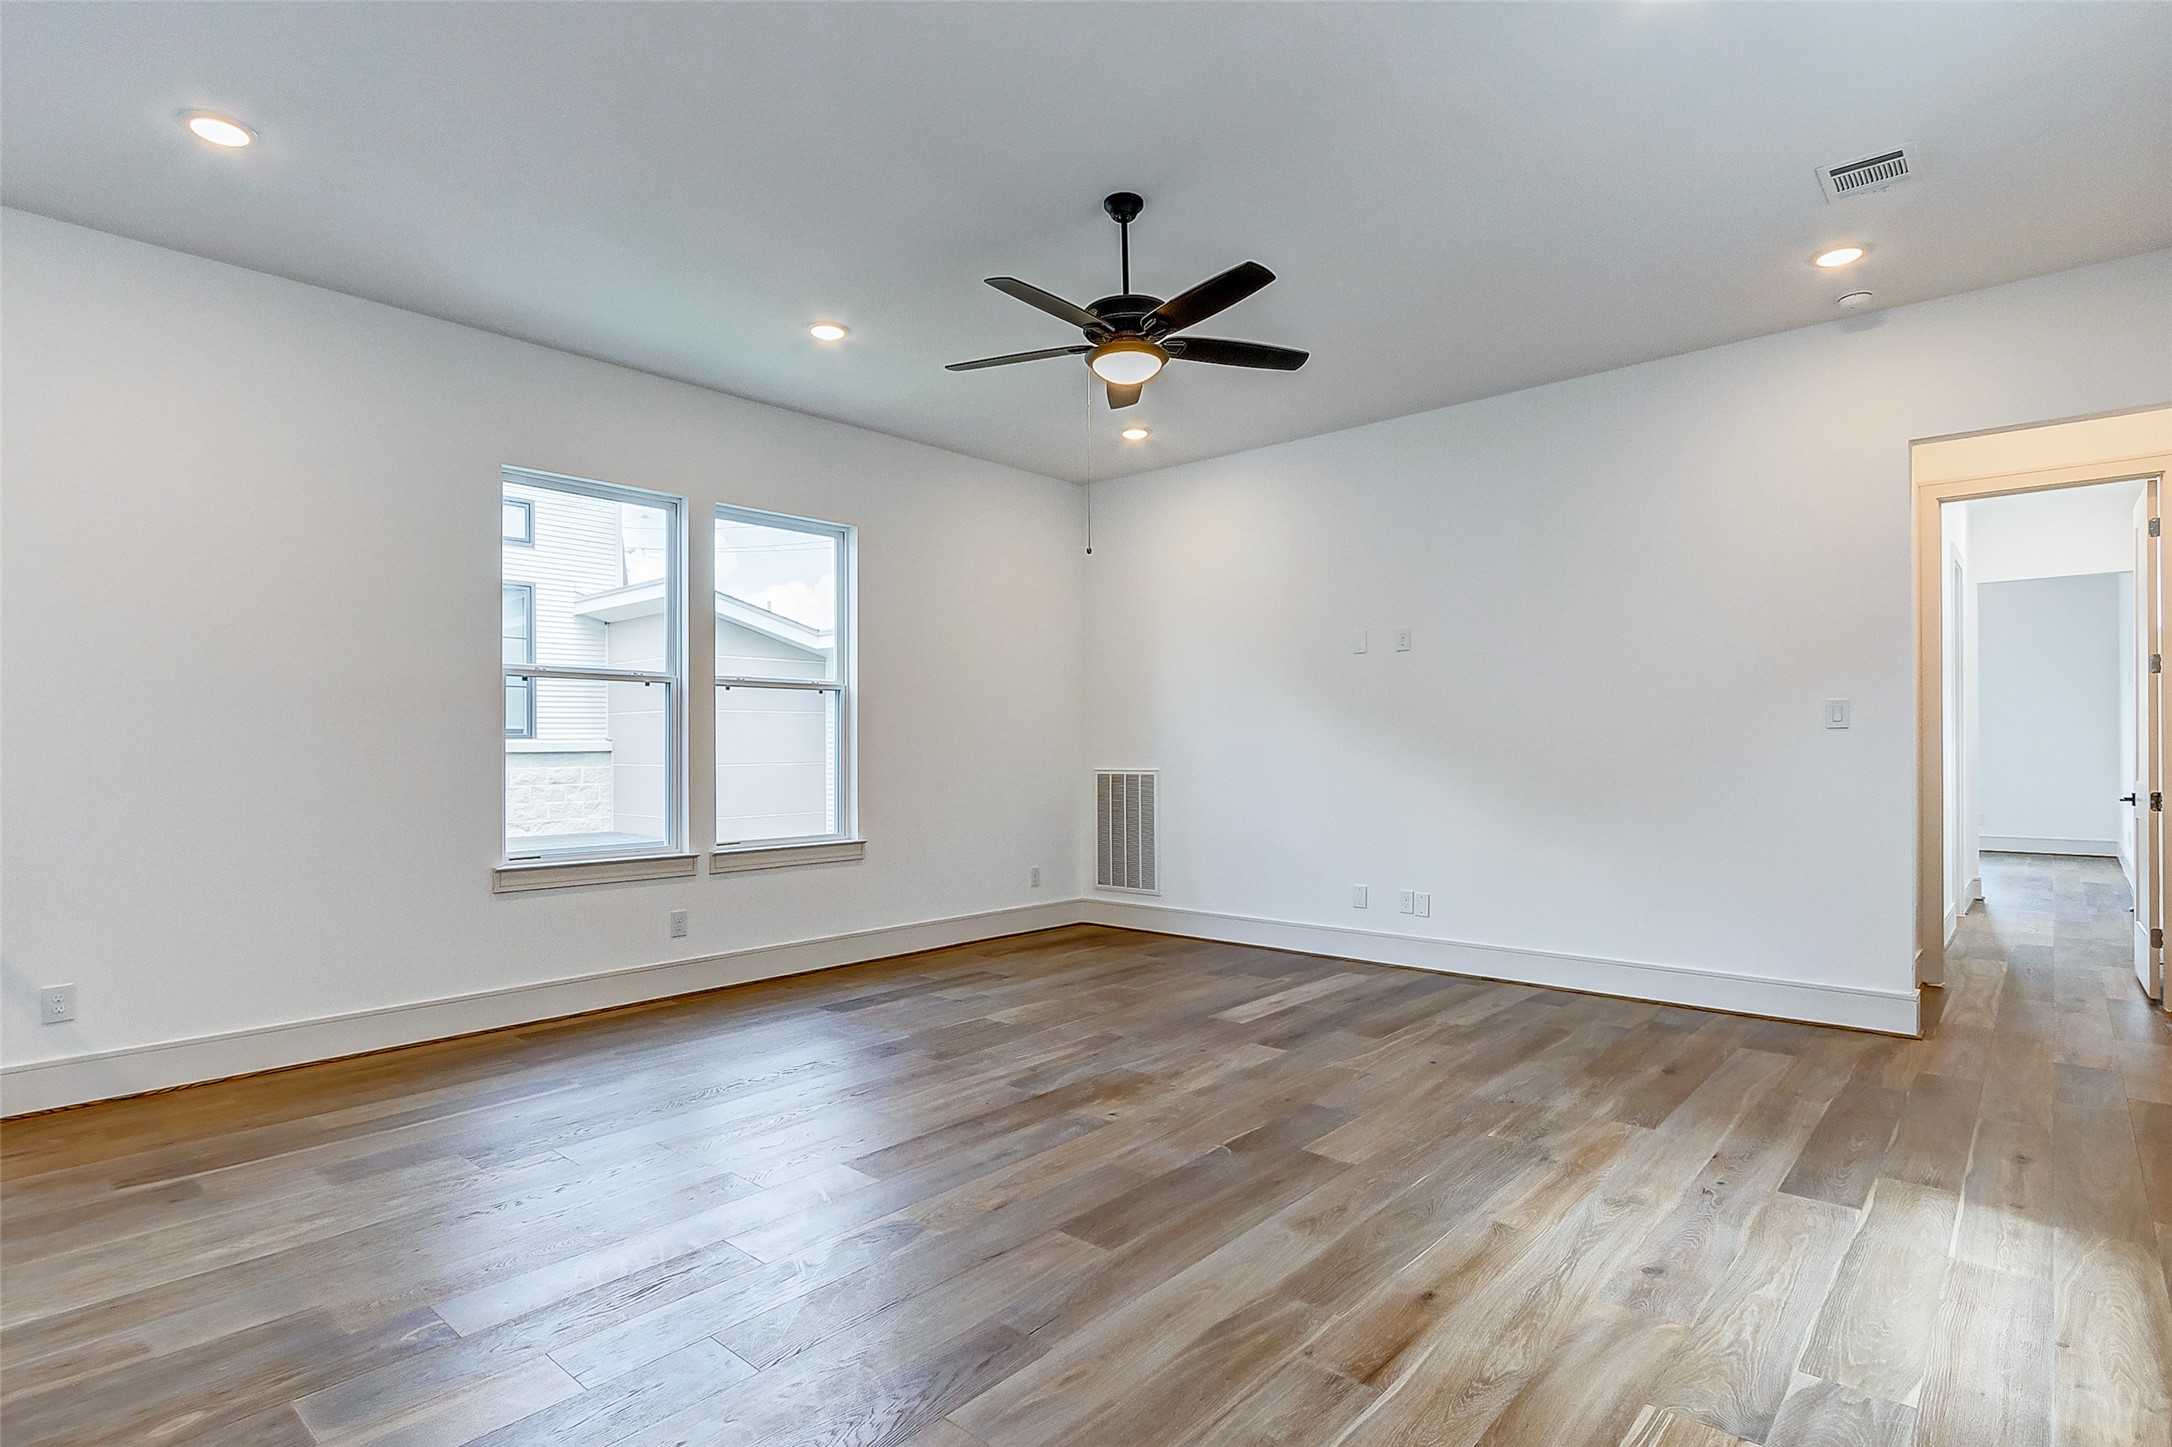 Upstairs, you'll find your spacious game room. Features include hardwood floors, designer paint, a modern fan, and bright windows.